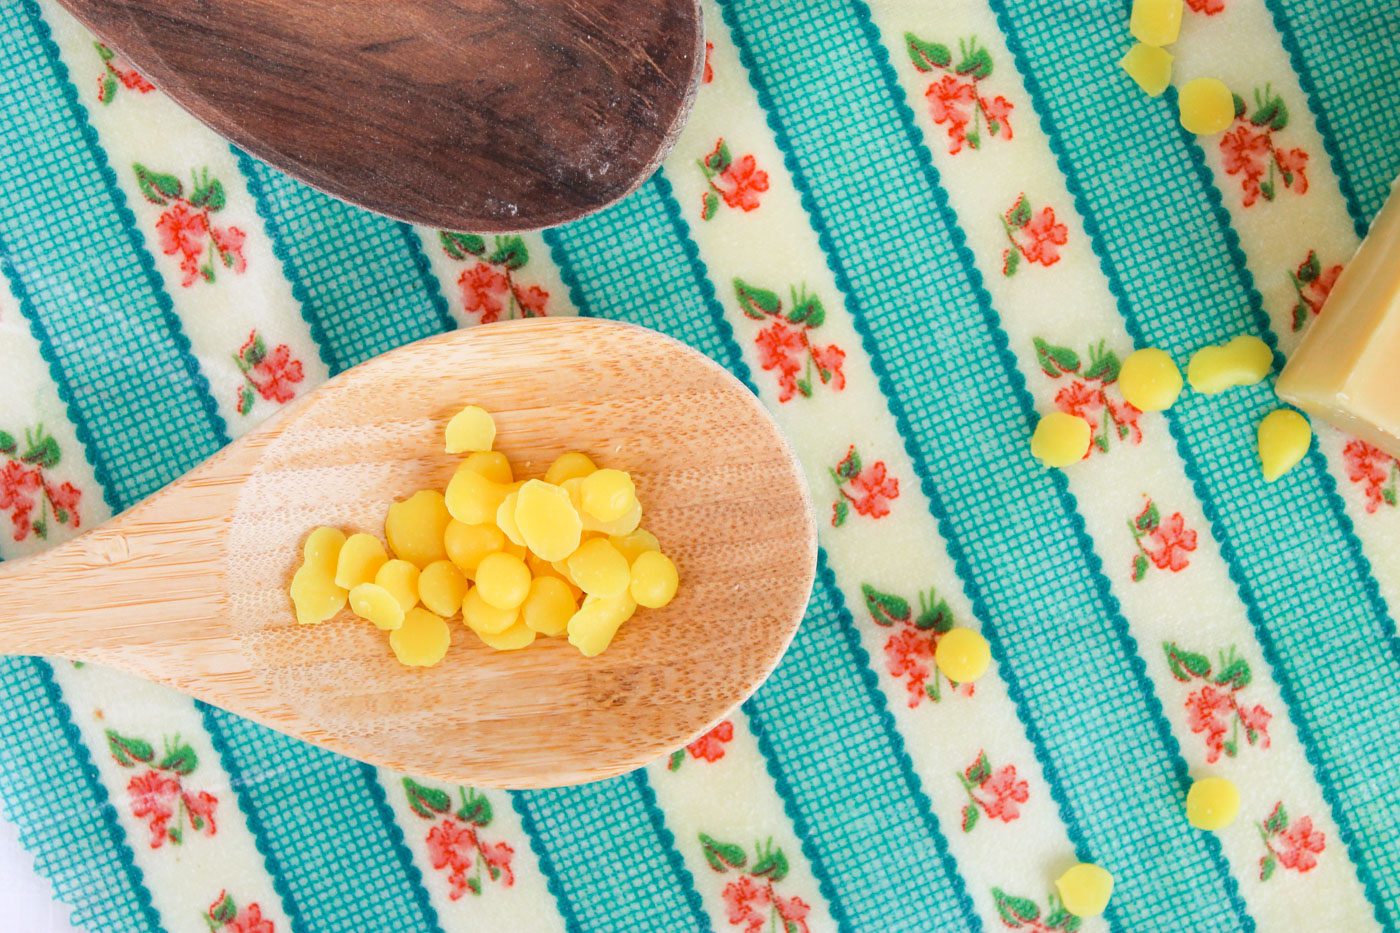 a wooden spoon full of beeswax pellets sits on top of a floral piece of fabric